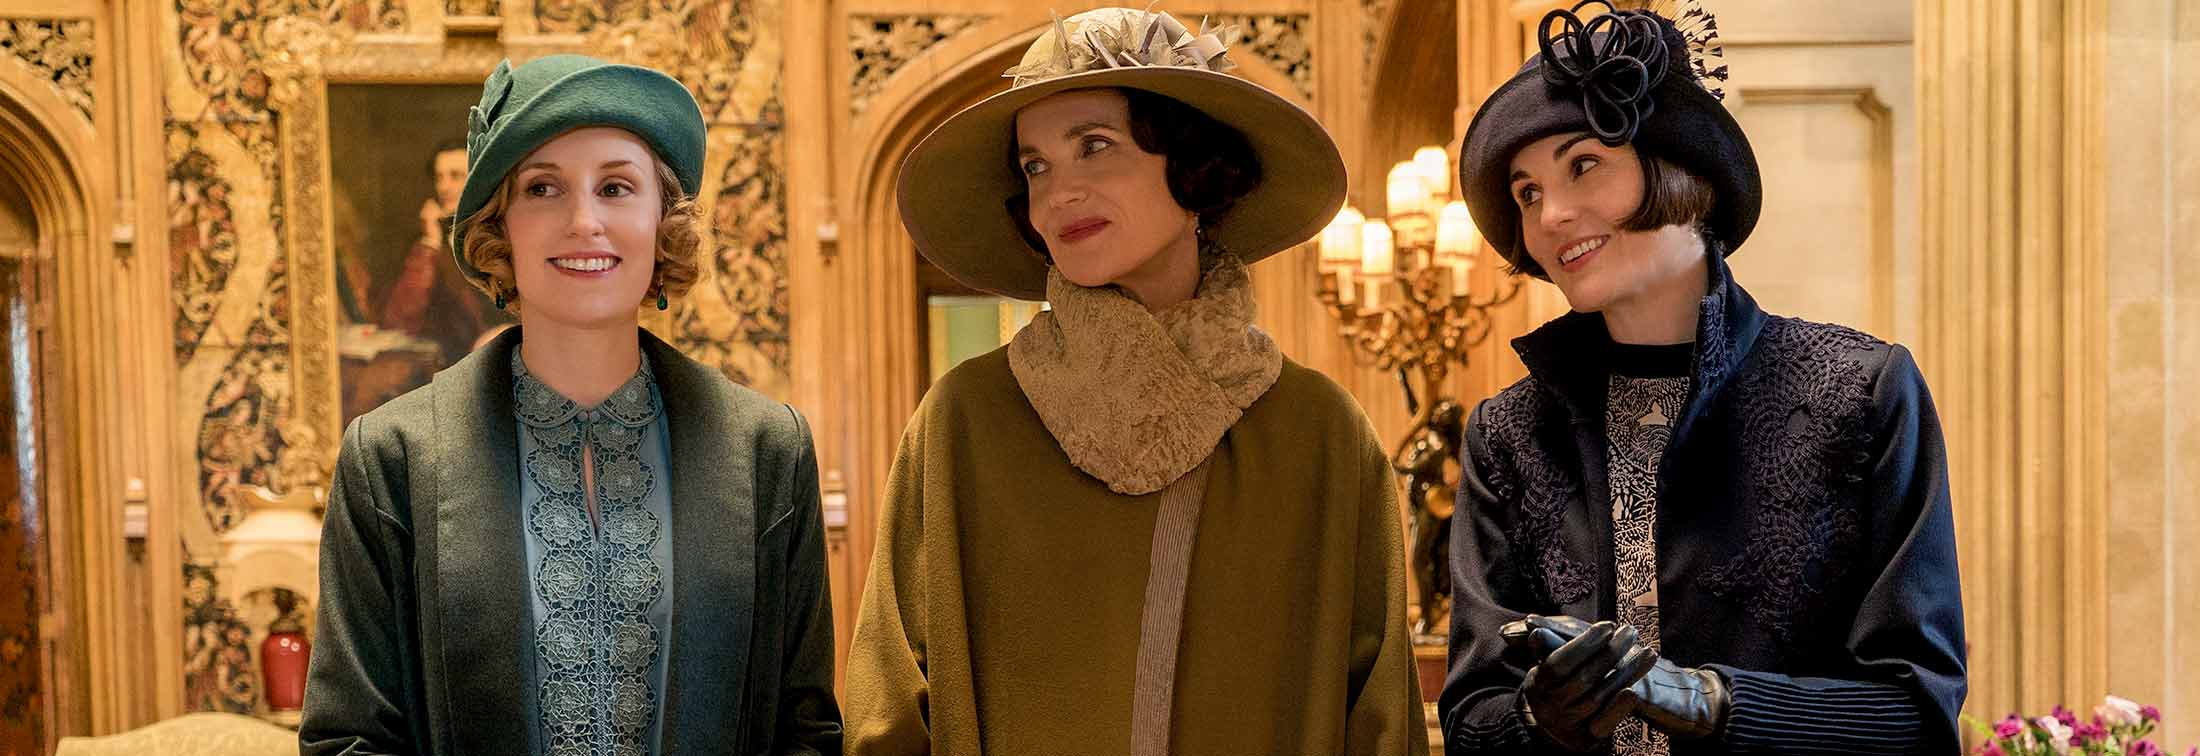 Downton Abbey - Transition from TV to film not as classy as expected